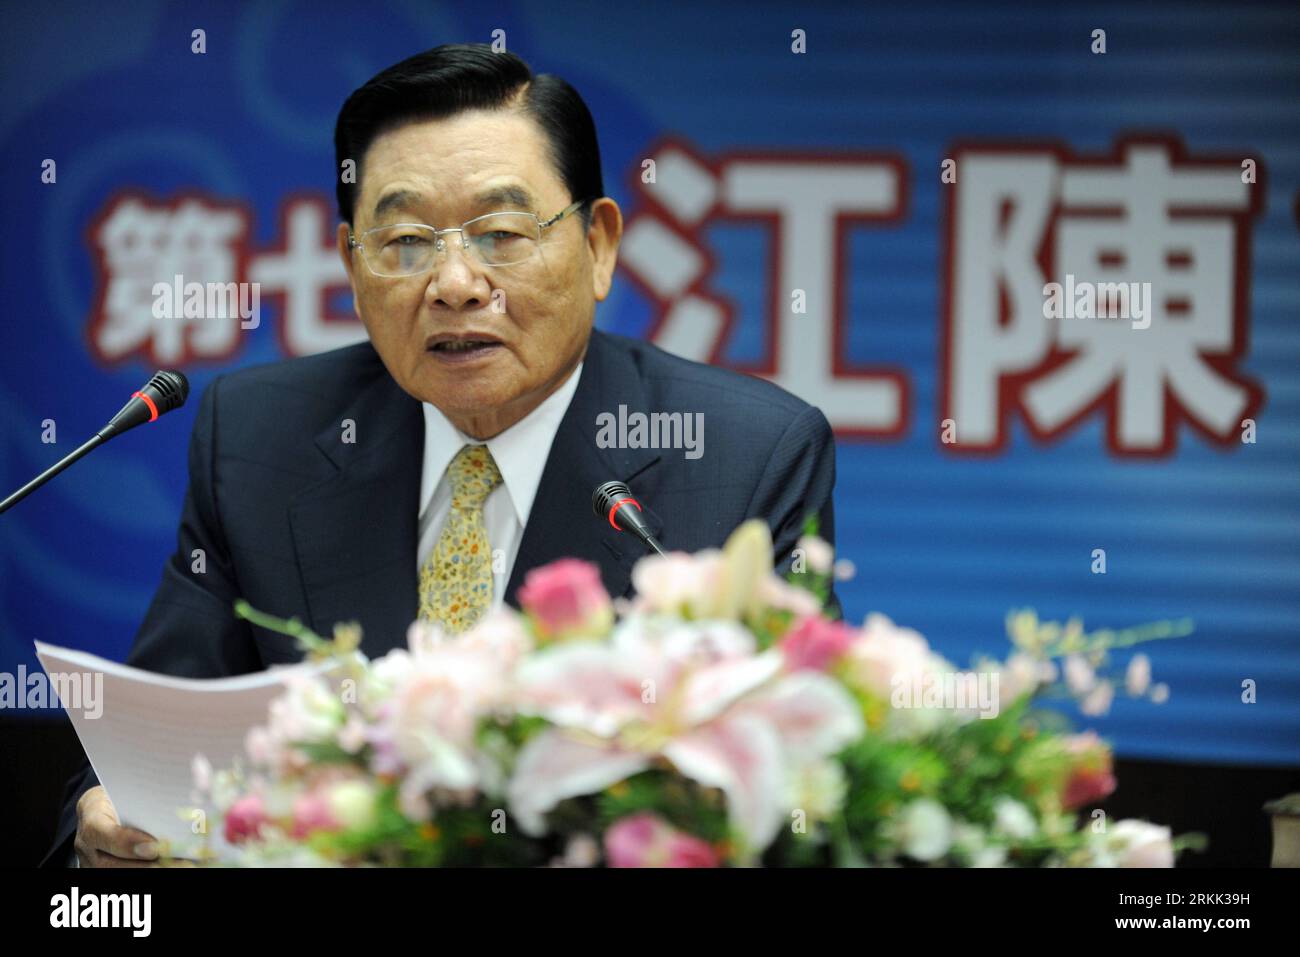 Bildnummer: 56193153  Datum: 18.10.2011  Copyright: imago/Xinhua (111018) -- TAIPEI, Oct. 18. 2011 (Xinhua) -- Chiang Pin-kung, chairman of Taiwan s Straits Exchange Foundation (SEF), addresses a press conference in Taipei, southeast China s Taiwan, Oct. 18, 2011, introducing the upcoming 7th talks between mainland and Taiwan negotiators. Negotiators from the Chinese mainland s Association for Relations Across the Taiwan Straits (ARATS) and Taiwan s SEF will hold talks from Oct. 19 to 21 in the northern city of Tianjin. (Xinhua/Wu Ching-teng) (ry) CHINA-TAIPEI-CROSS-STRAIT-TALKS (CN) PUBLICATI Stock Photo